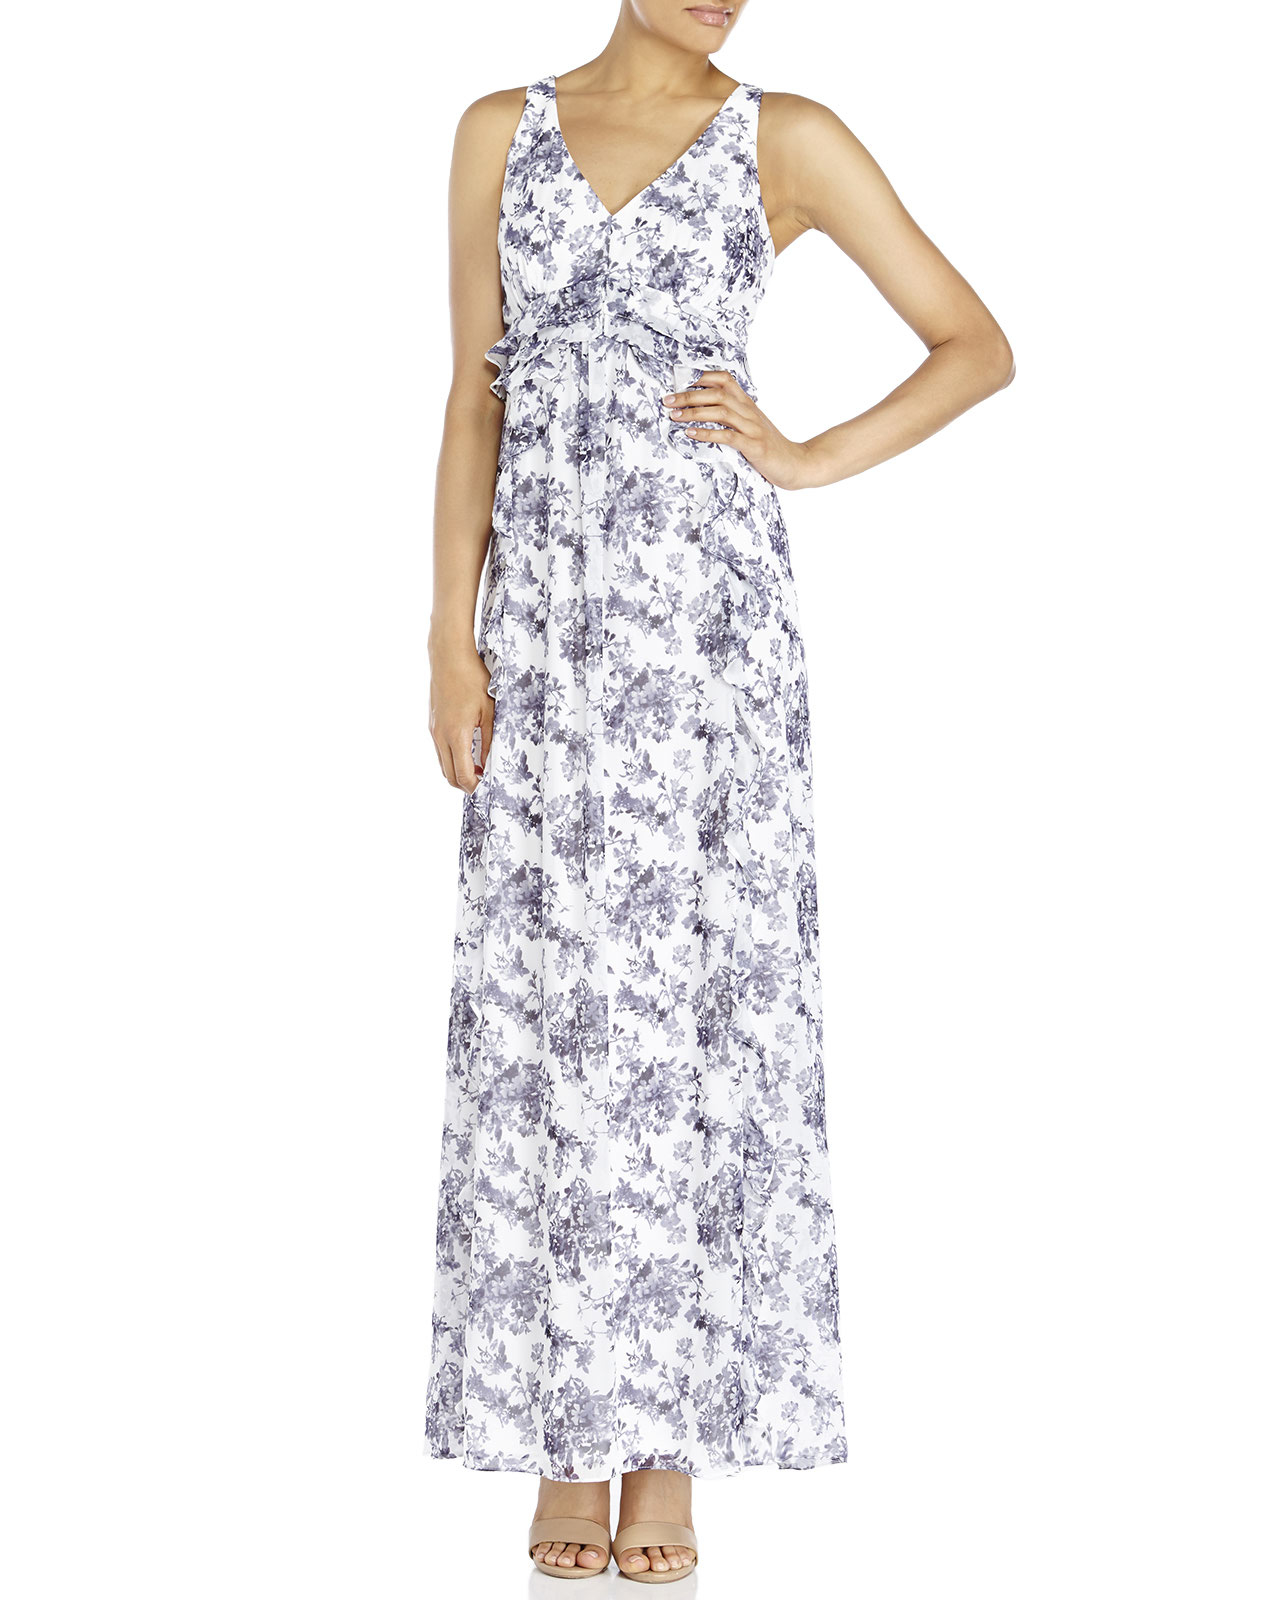 Jessica simpson White Floral Ruffle Maxi Dress in White | Lyst